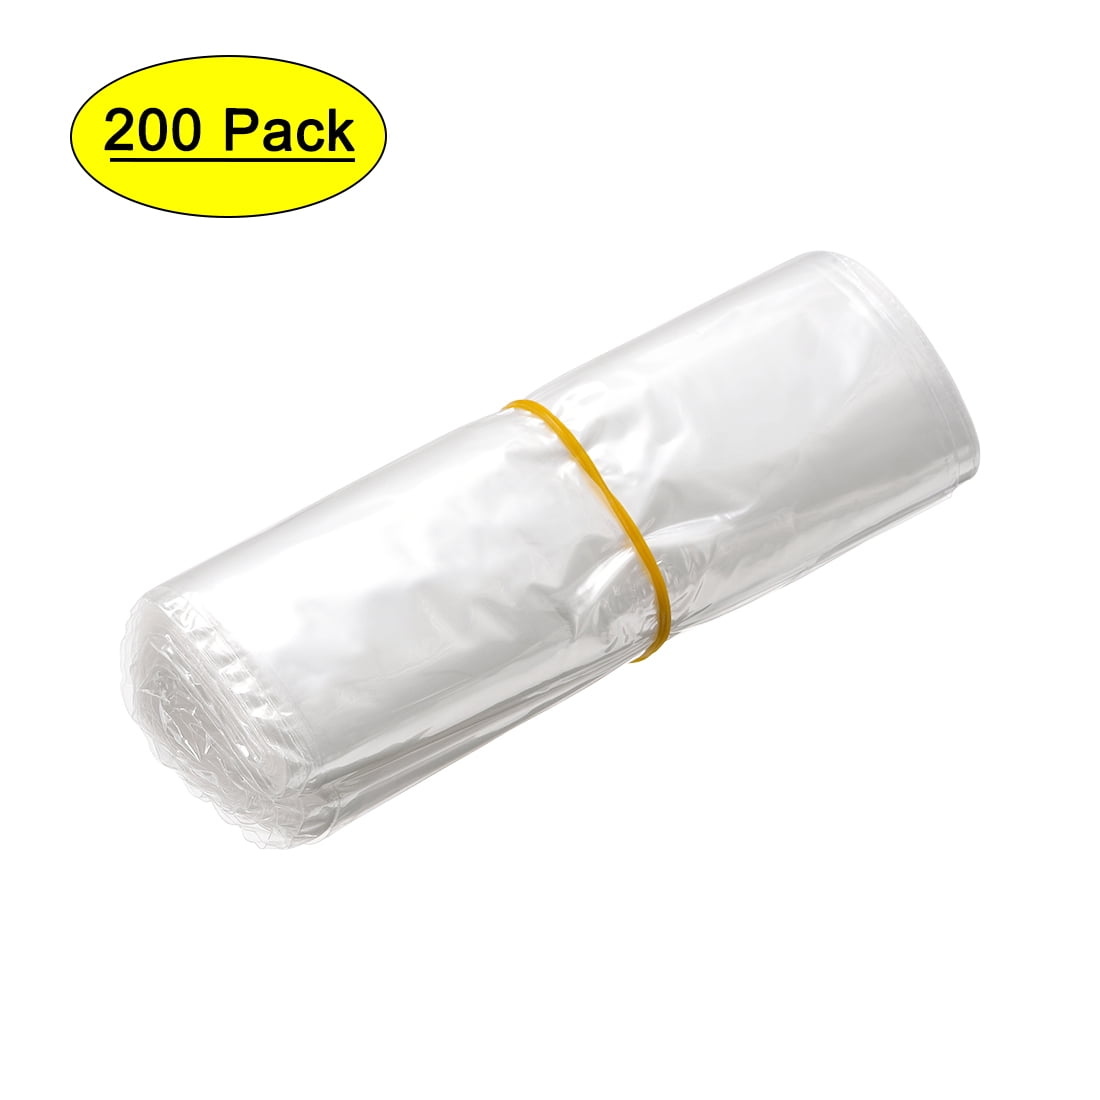 Shrink Wrap Bags,200 Pcs 5x6 Inches Clear PVC Heat Shrink Wrap for Packagaing. 